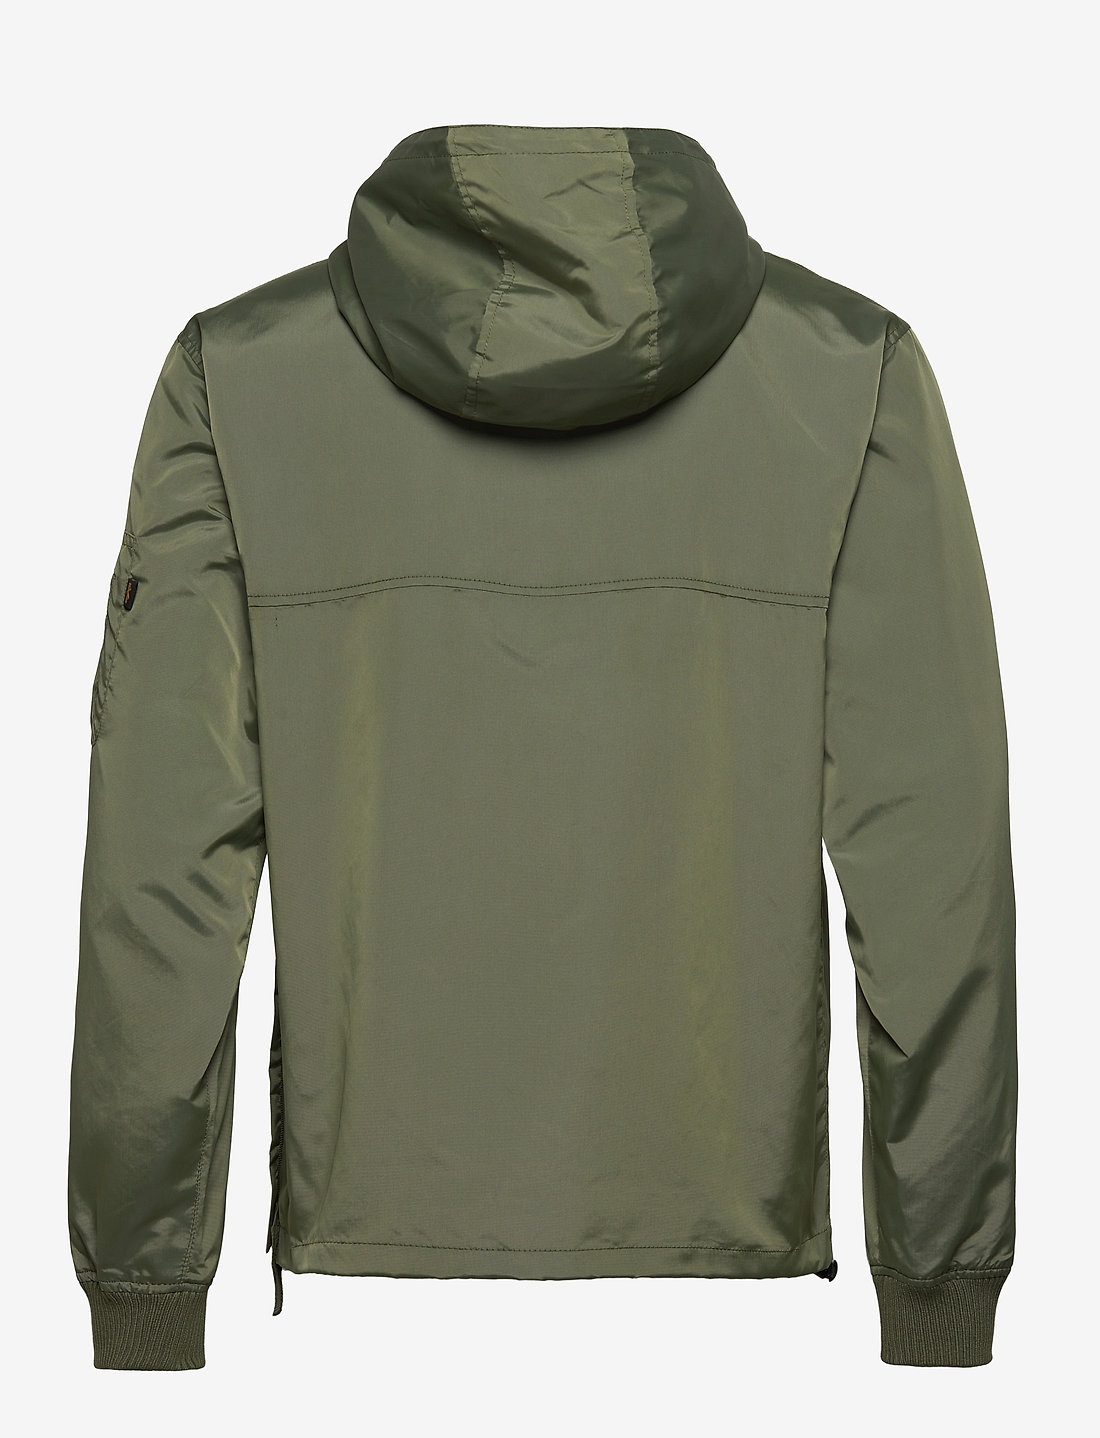 Alpha Industries Tt Anorak Lw - 140 €. Buy Anorak from Alpha Industries  online at Boozt.com. Fast delivery and easy returns